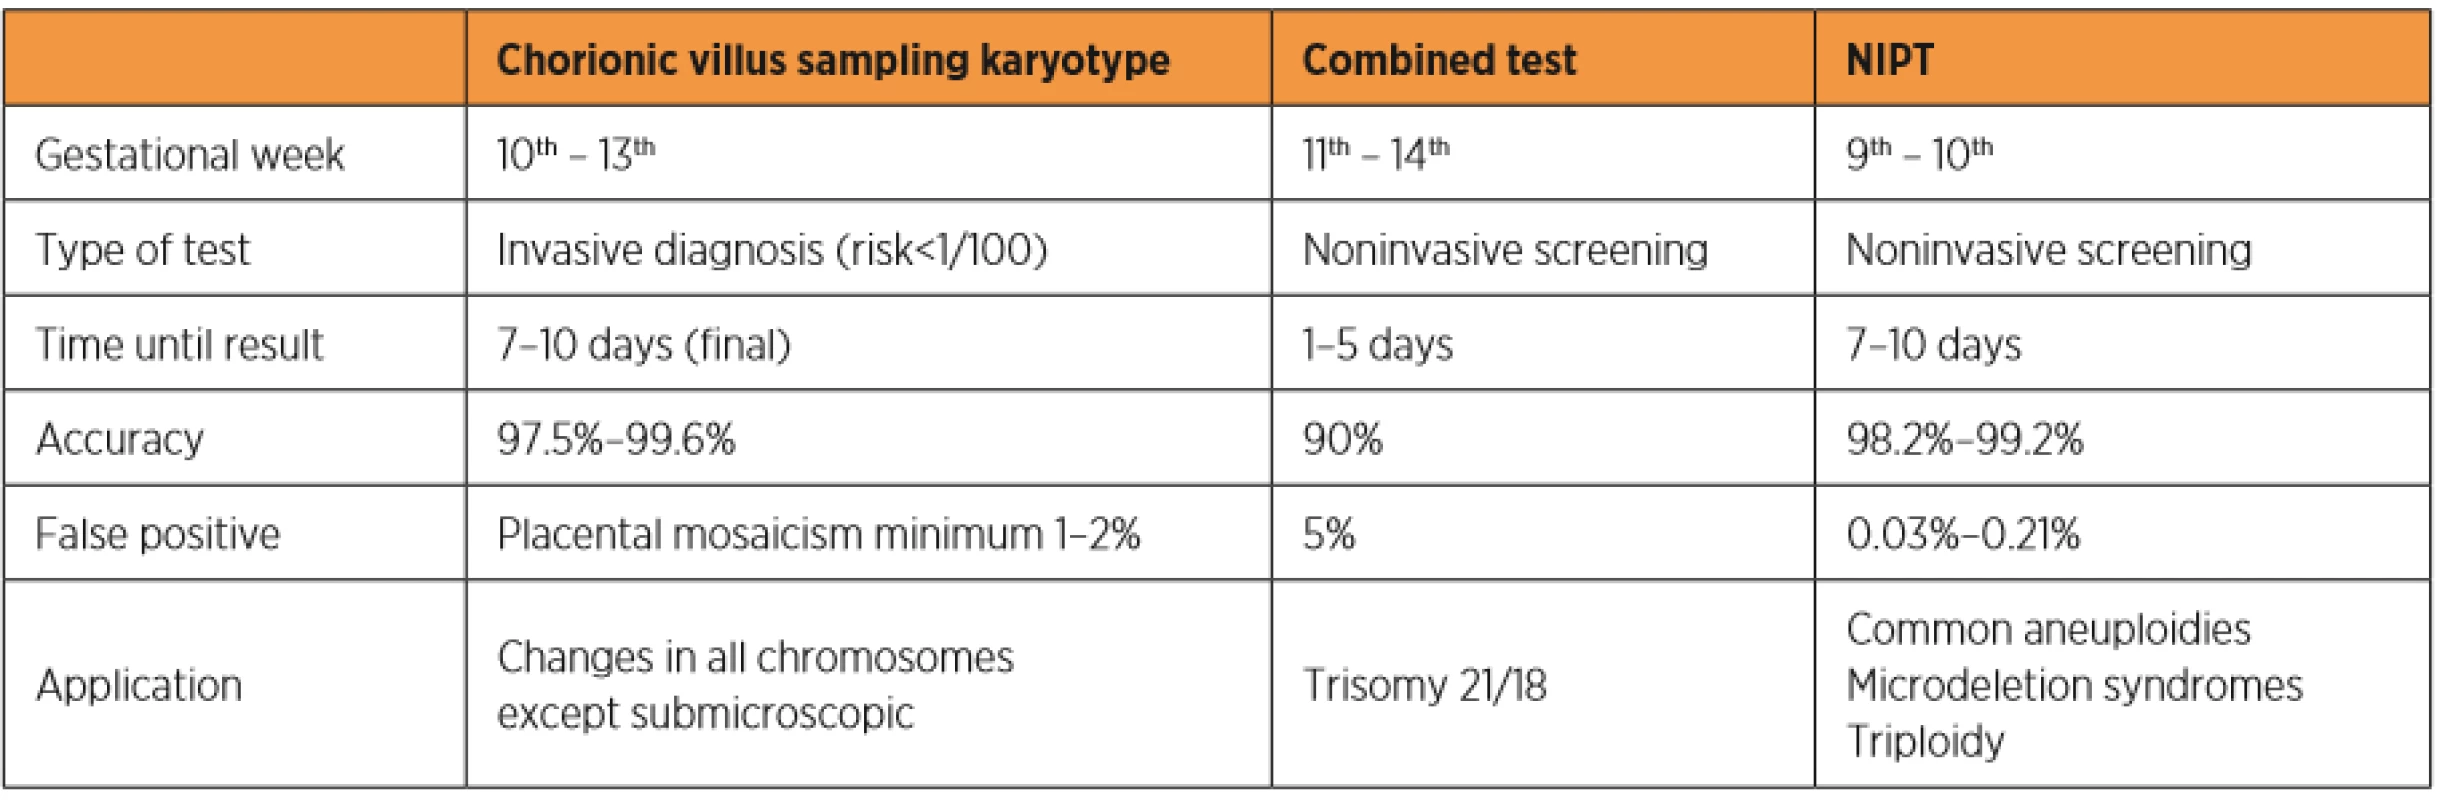 Comparison of prenatal tests to detect aneuploidies available during the first trimester of pregnancy.